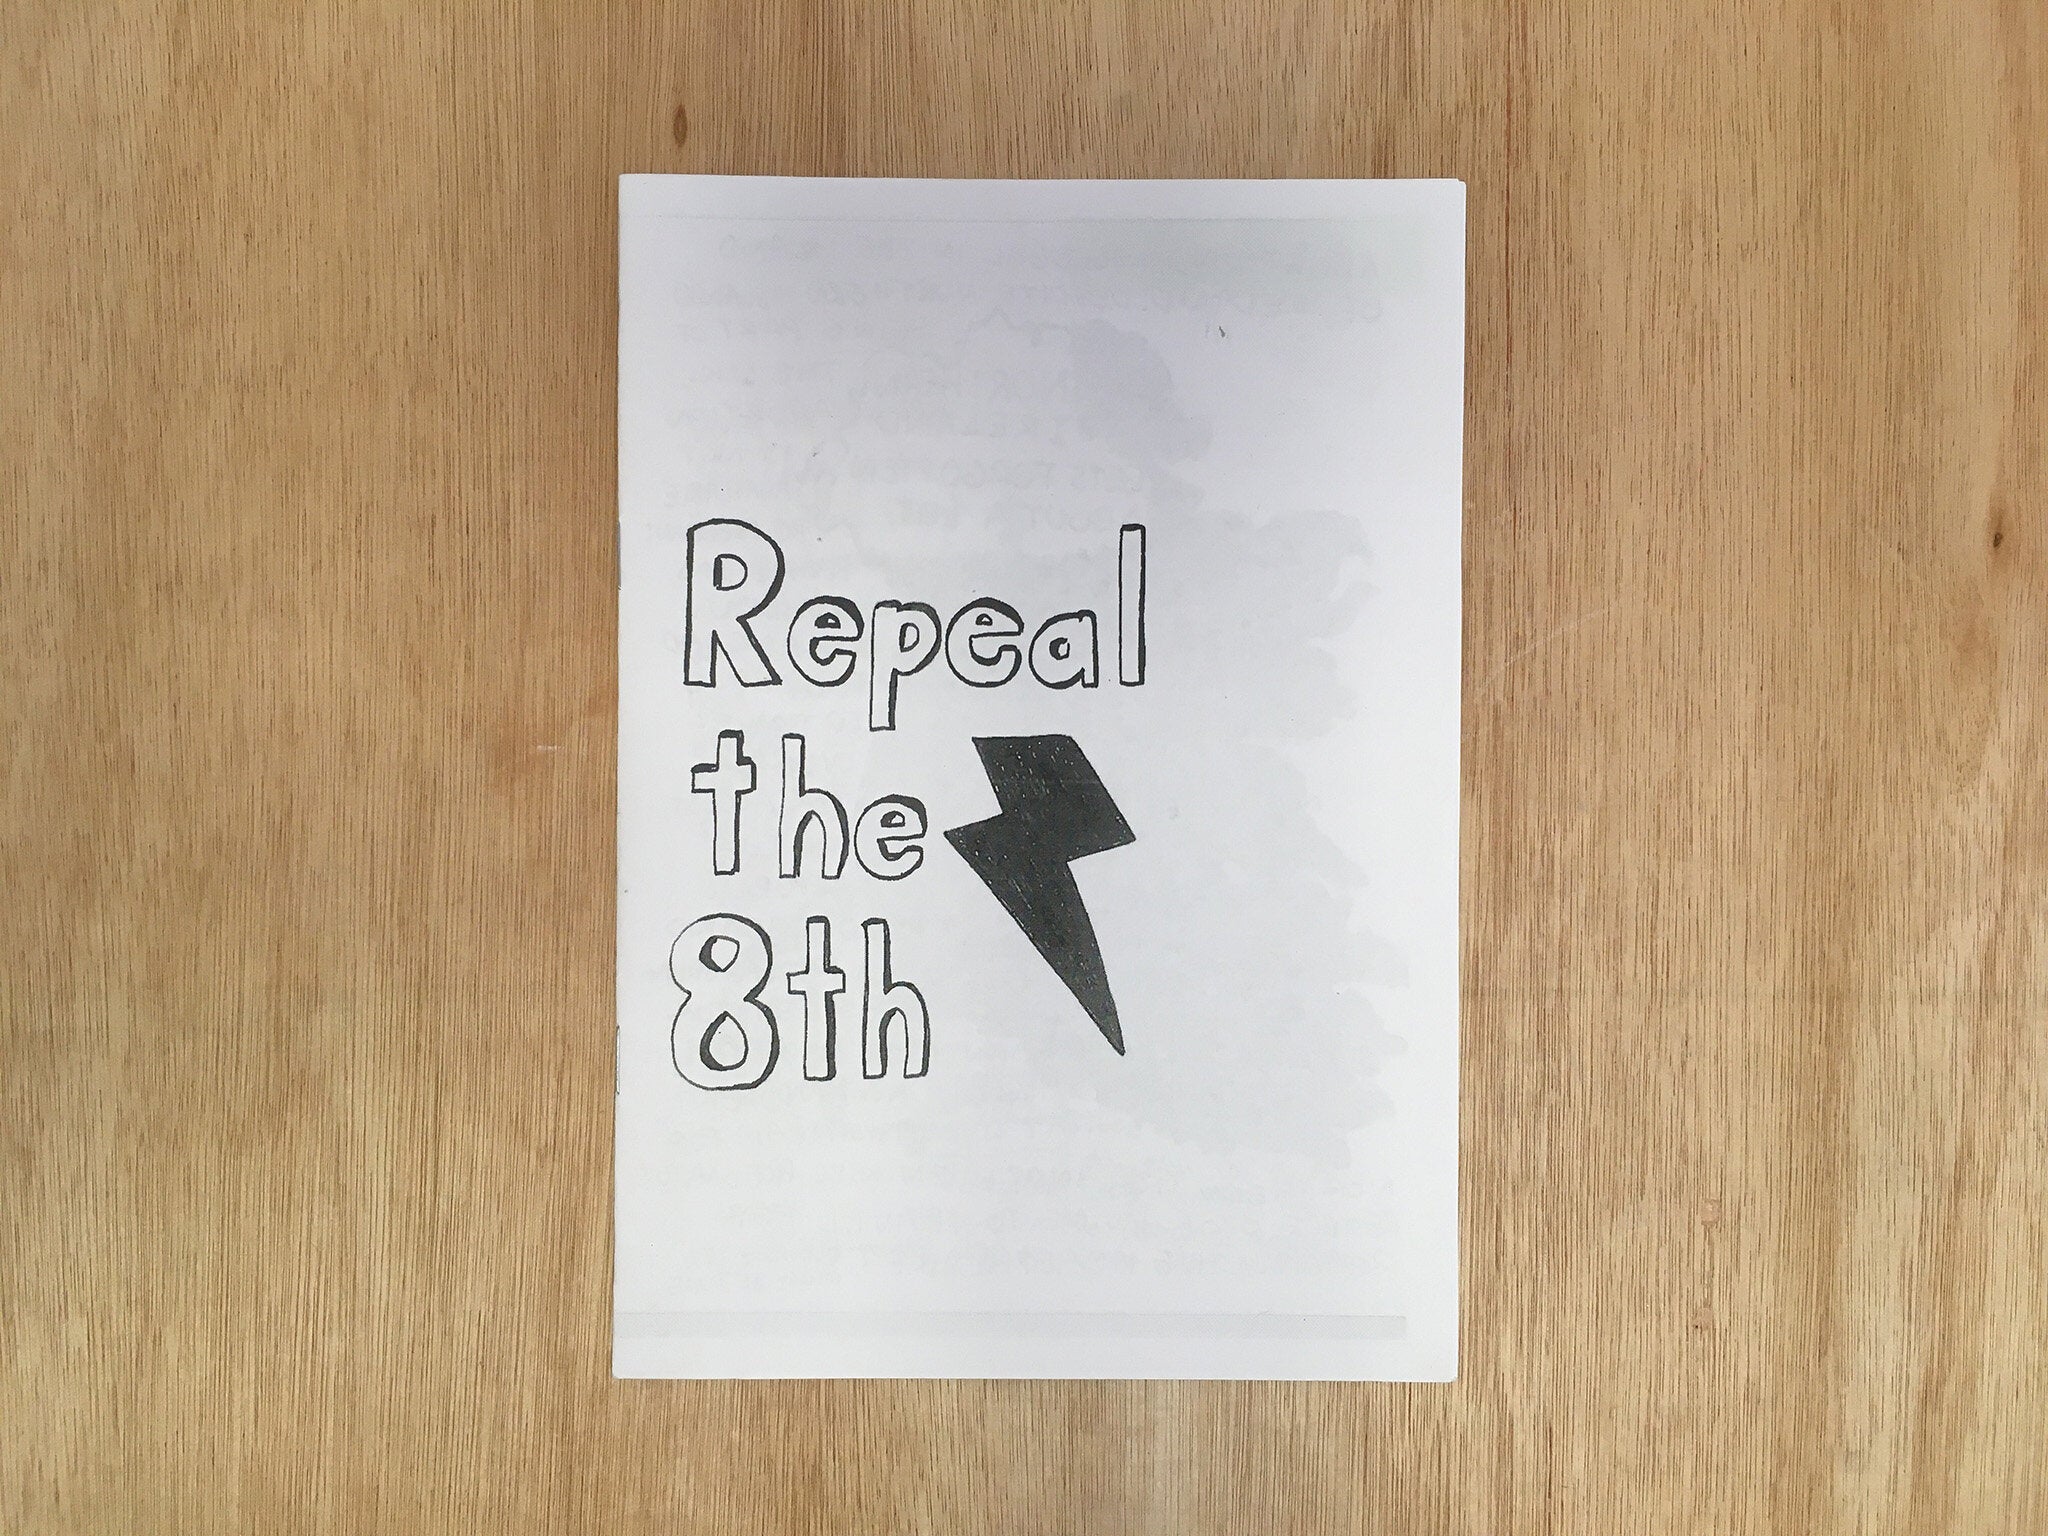 REPEAL THE 8TH by Olivia Furey